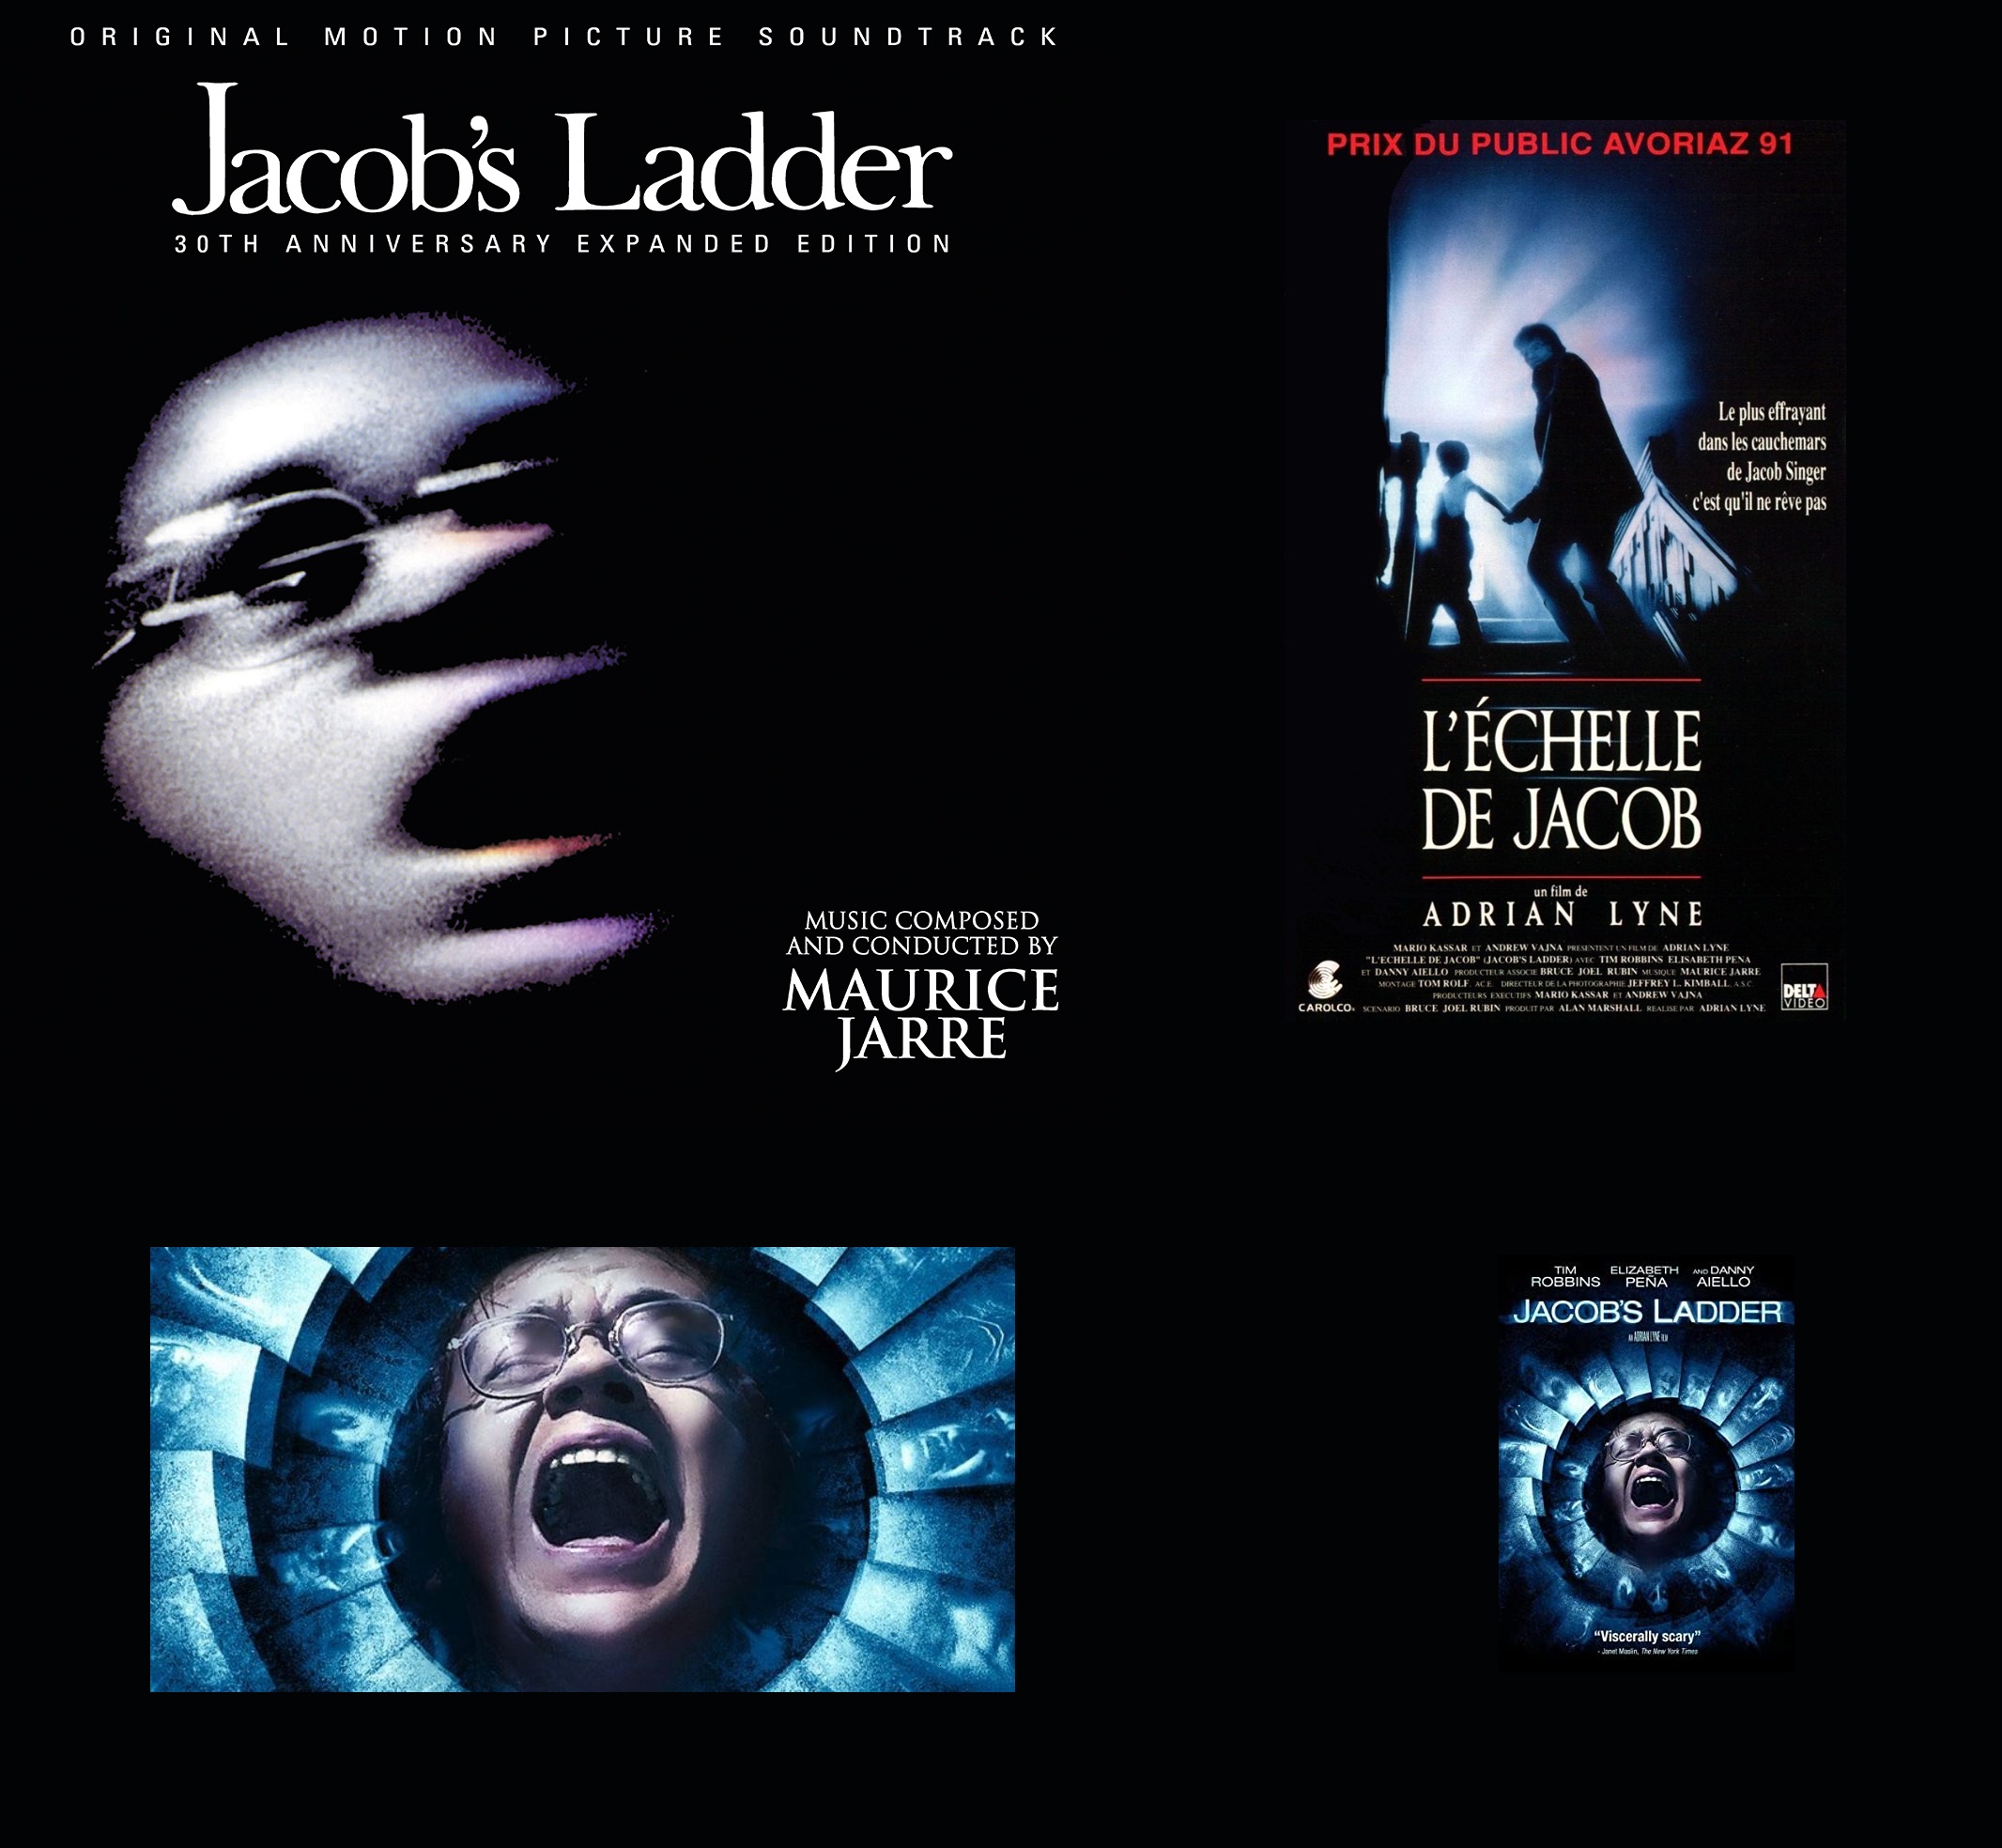 Jacobs Ladder The 30th anniversary edition